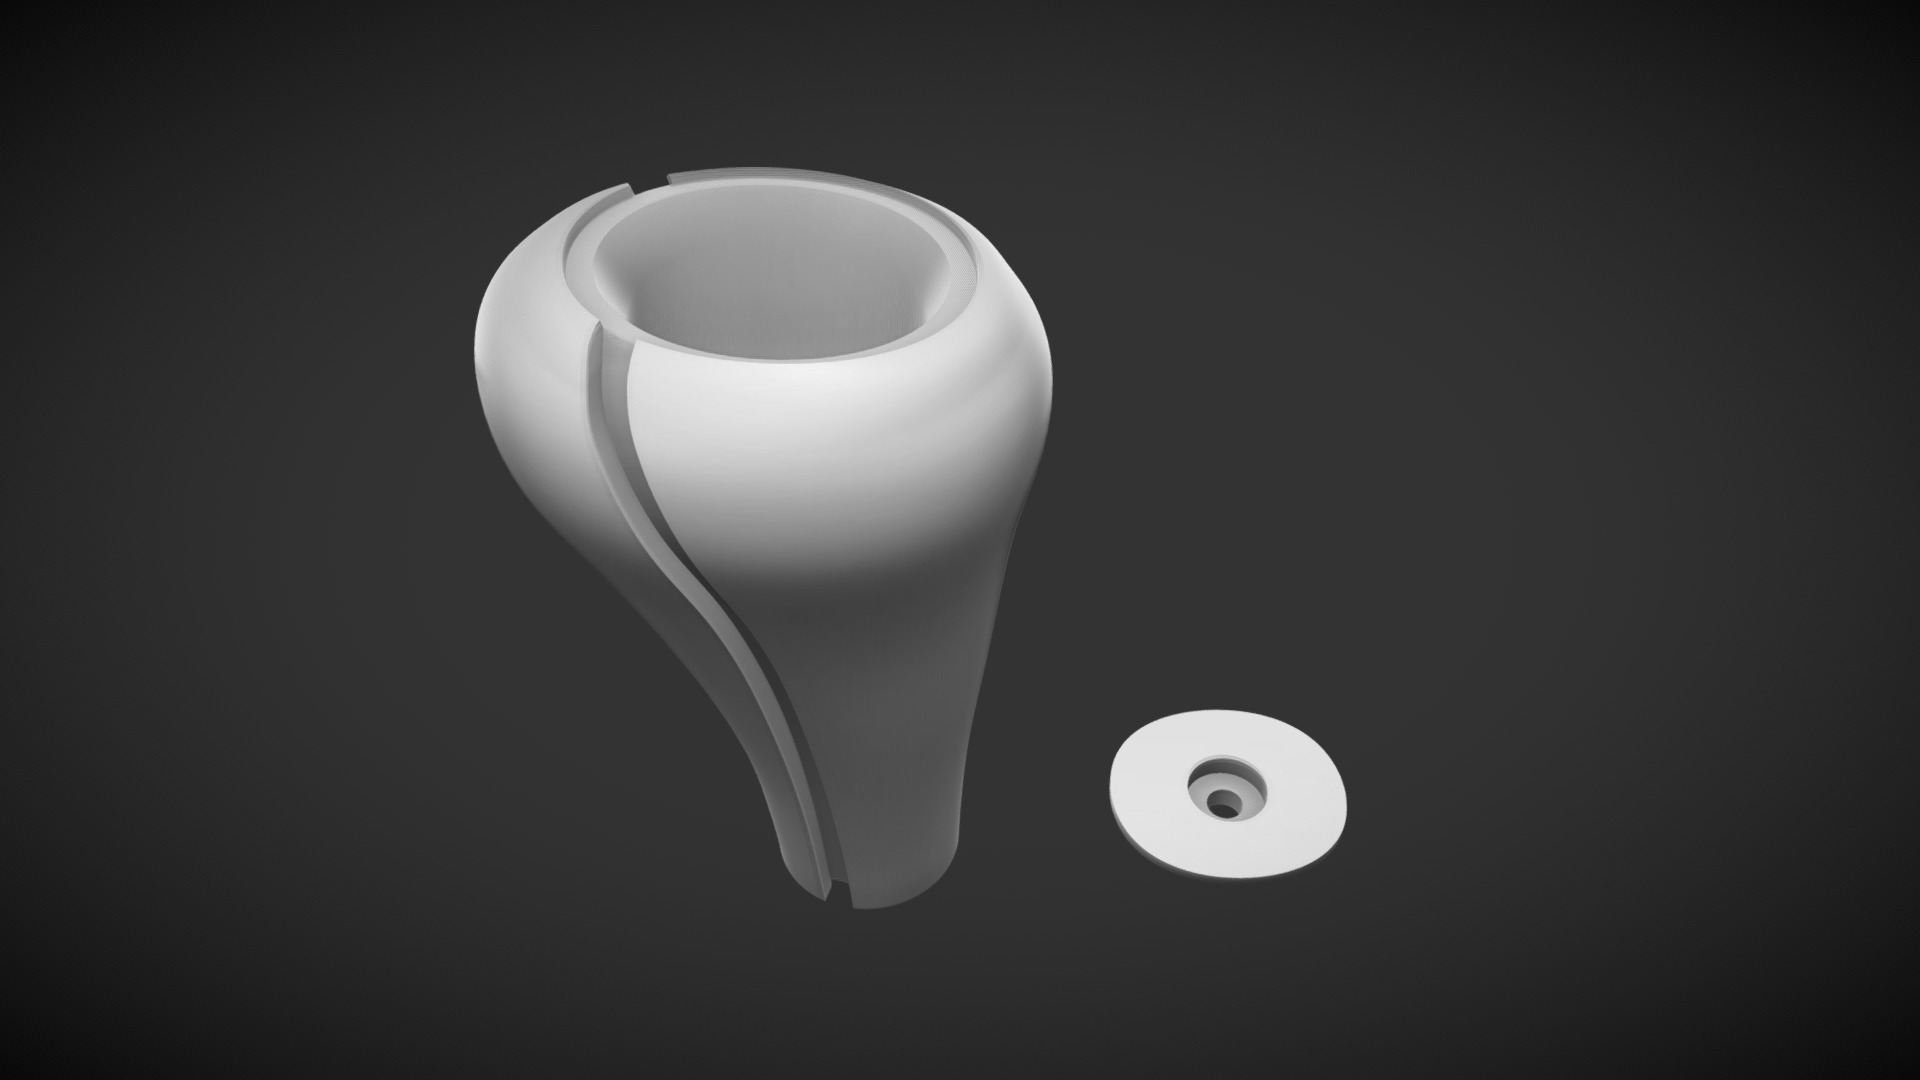 3D model E28 Gear Shift Knob 02 – 3D print - This is a 3D model of the E28 Gear Shift Knob 02 - 3D print. The 3D model is about a white lamp shade.